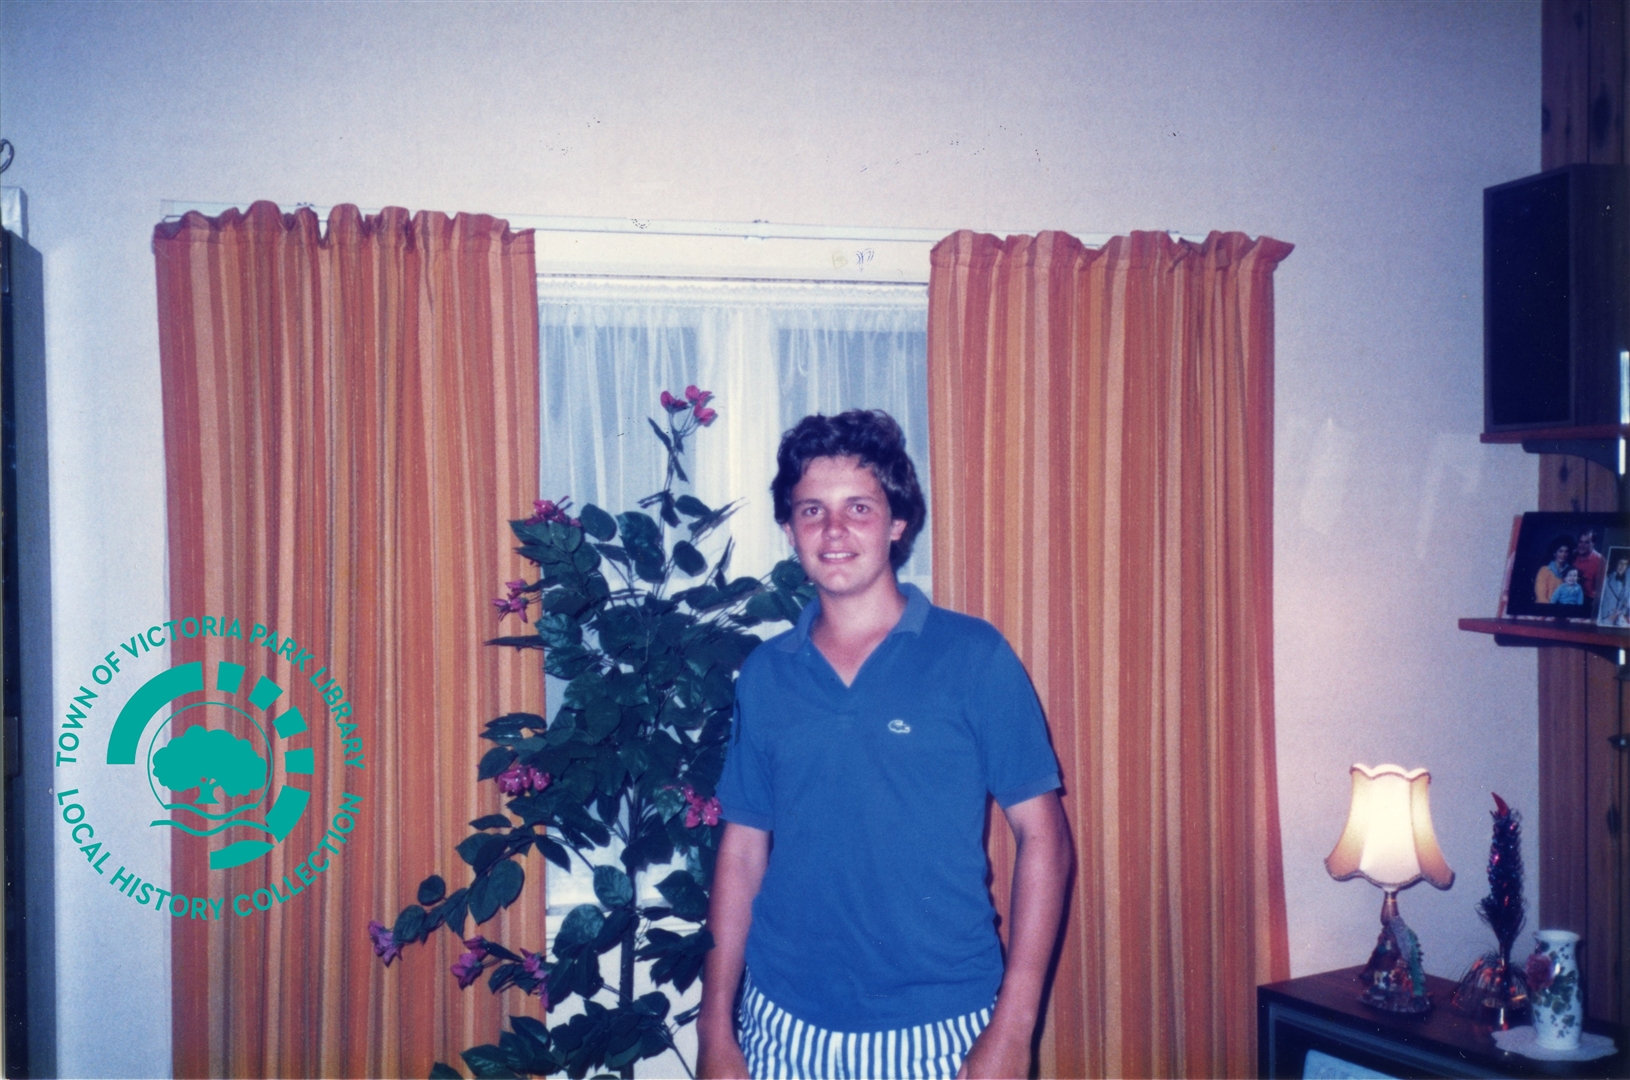 PH00045-06 Andrew Newman inside the house at 16 Whittlesford Street, 1988 aged 16 Image